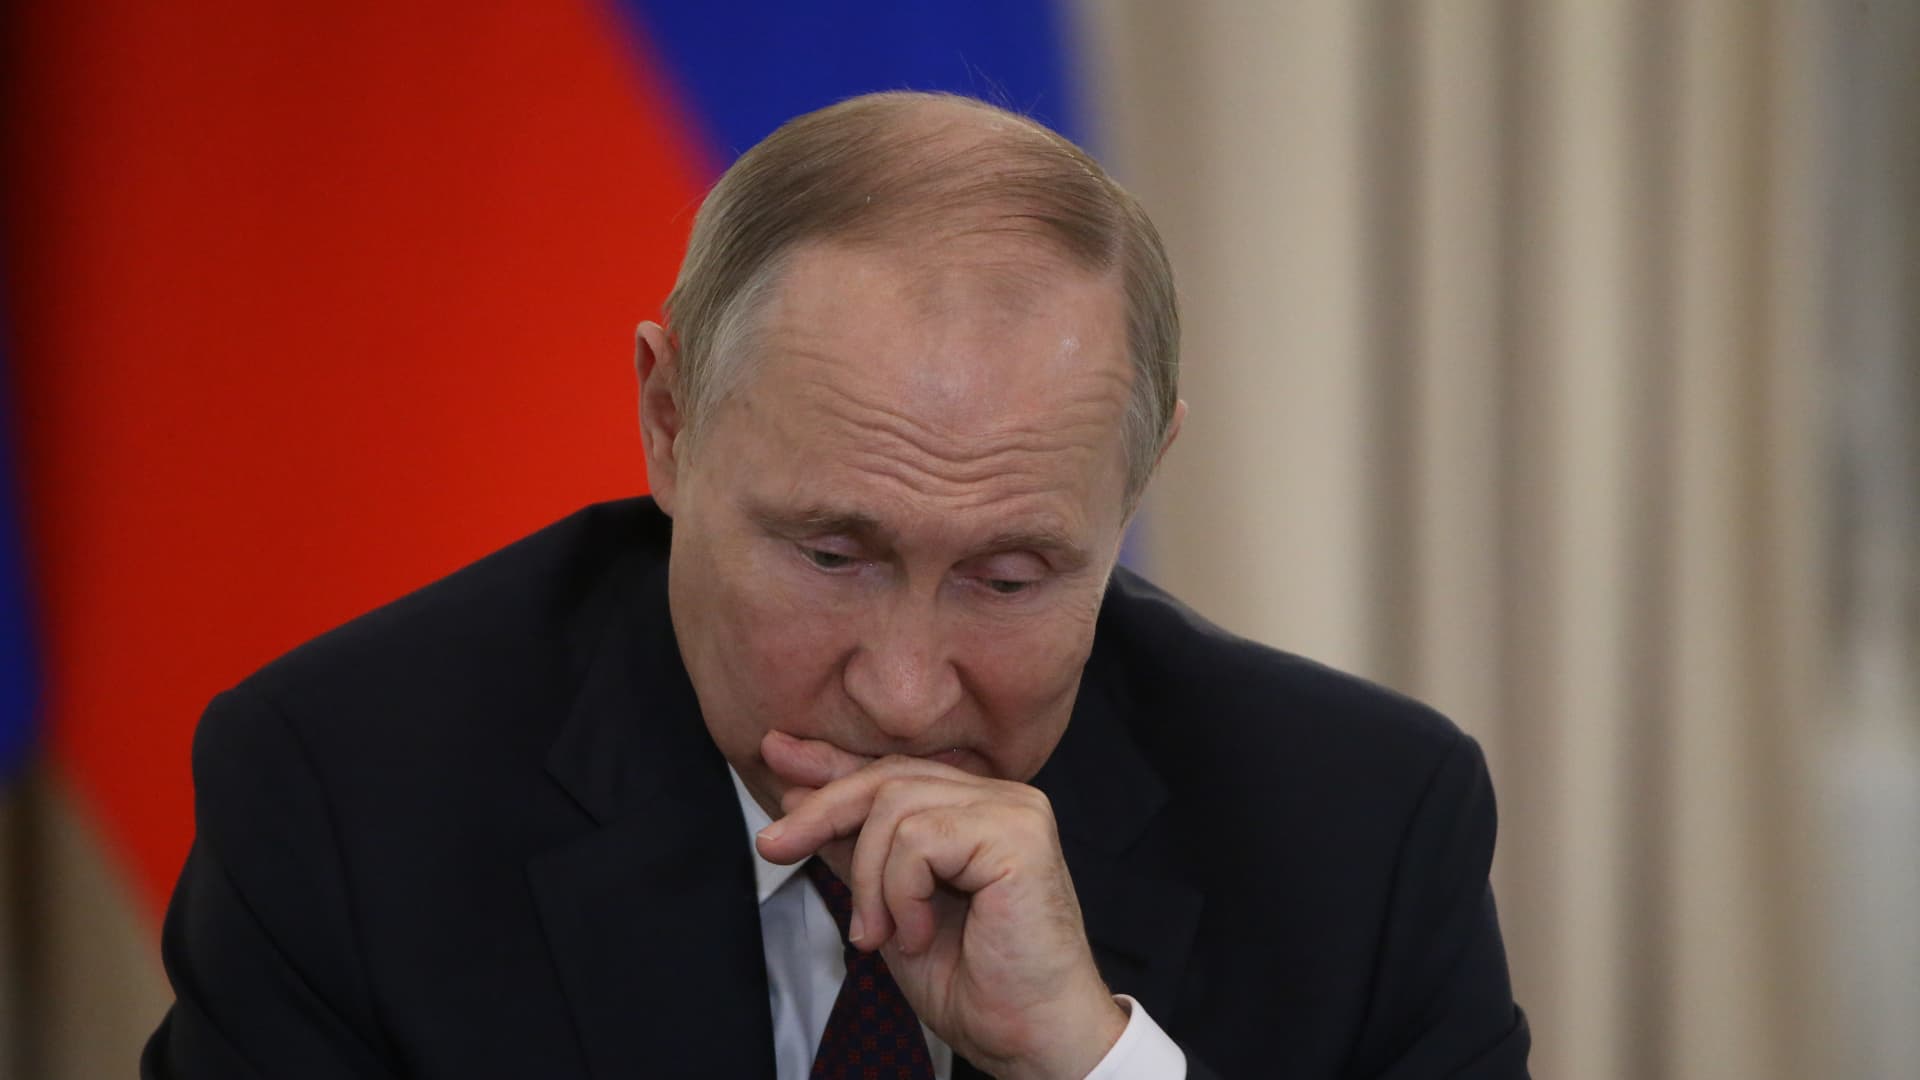 Russia's hopes for a Republican landslide to hurt Ukraine are vanishing fast